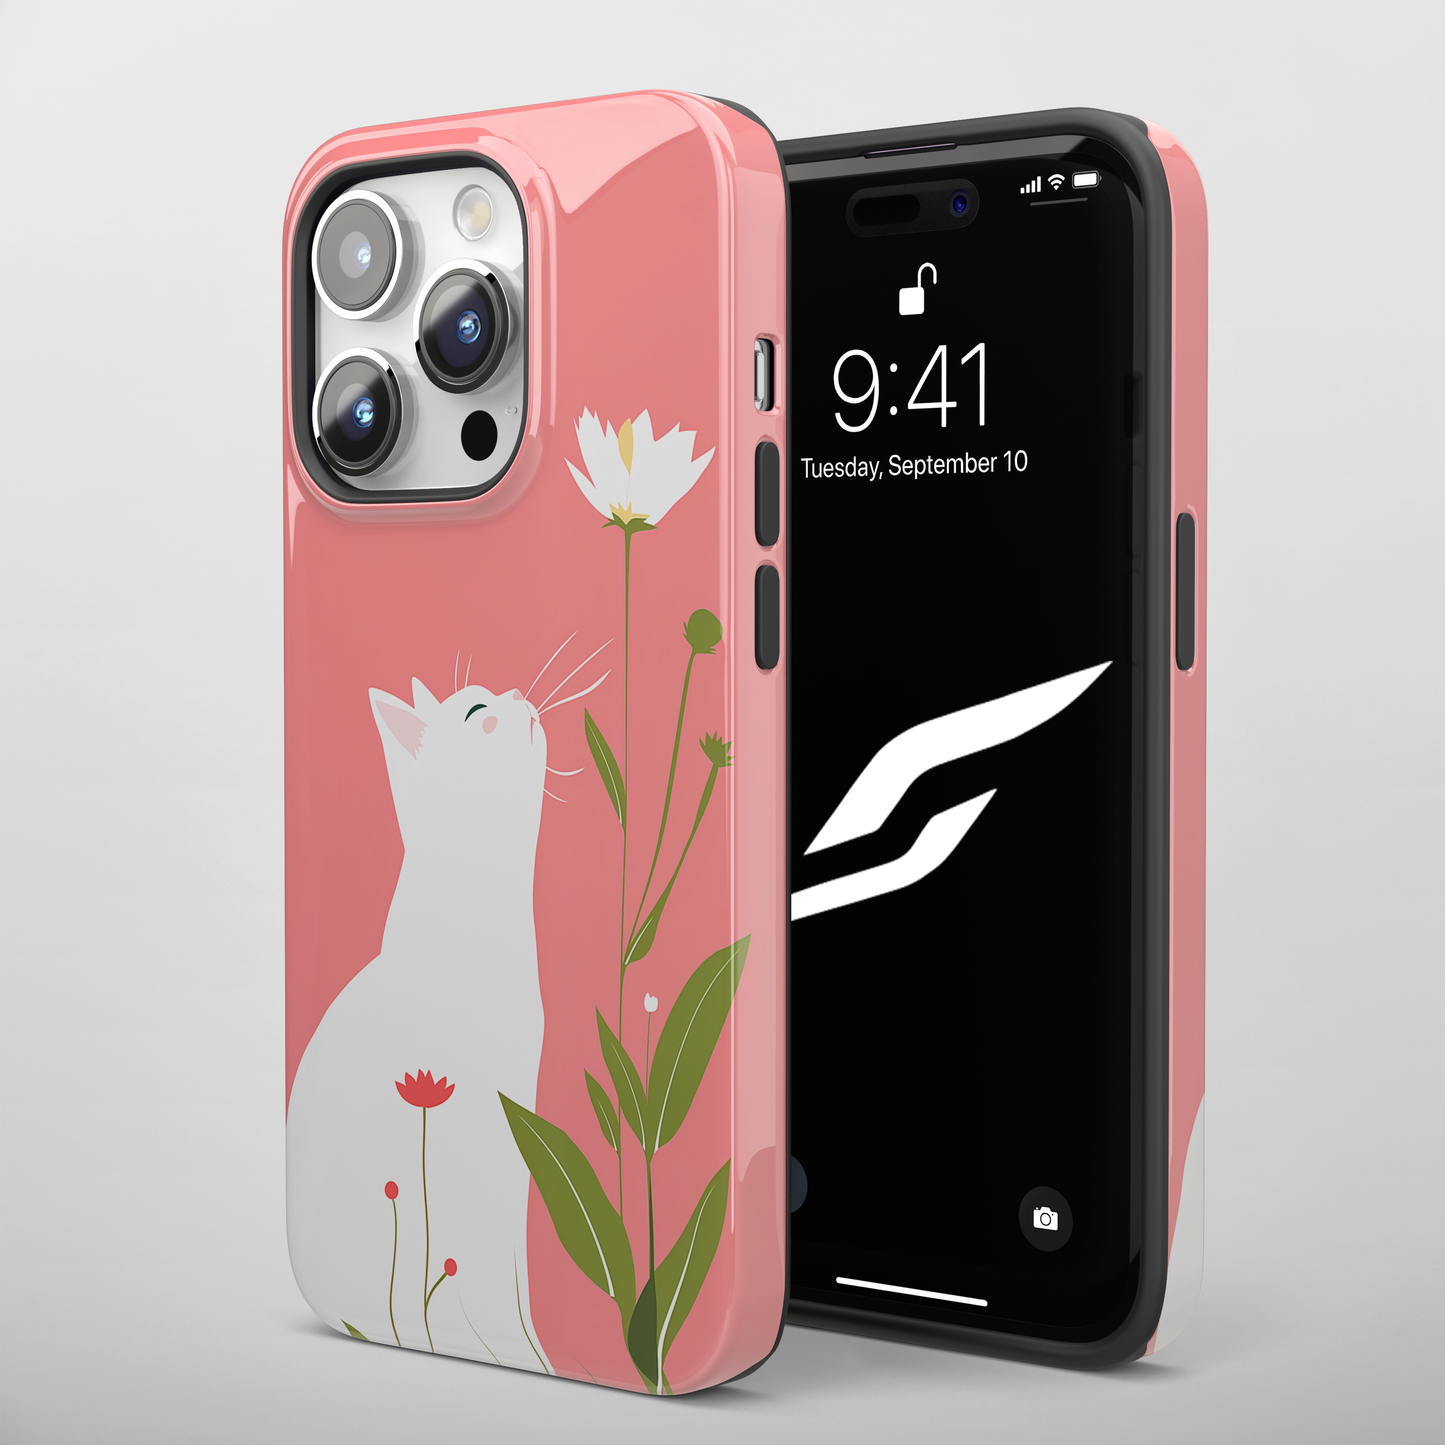 Blossom Gazer (iPhone Case 11-15)Elevate your iPhone's protection and style with RimaGallery's A serene white cat admiring spring blossoms on a pastel pink On case, featuring dual-layer defense and RimaGallery